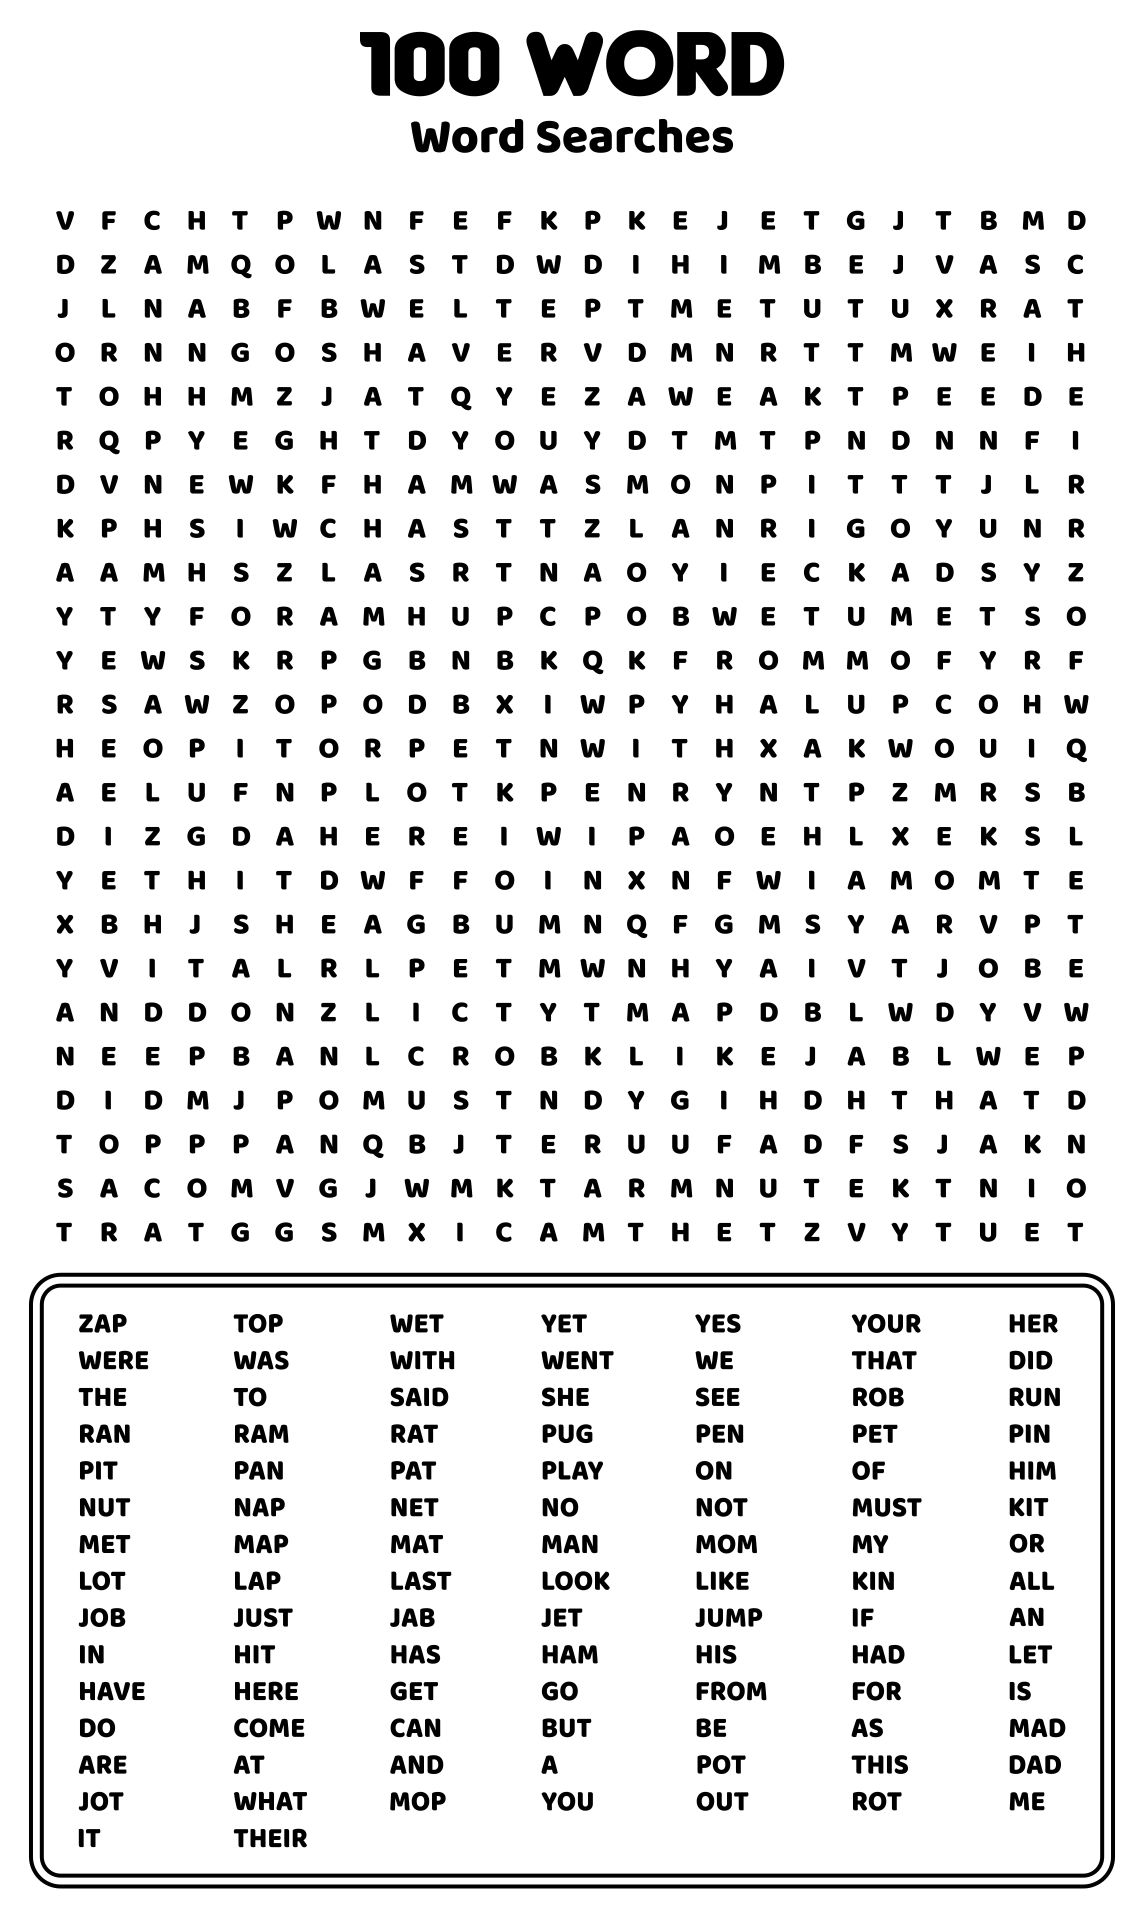 100-word-word-search-printable